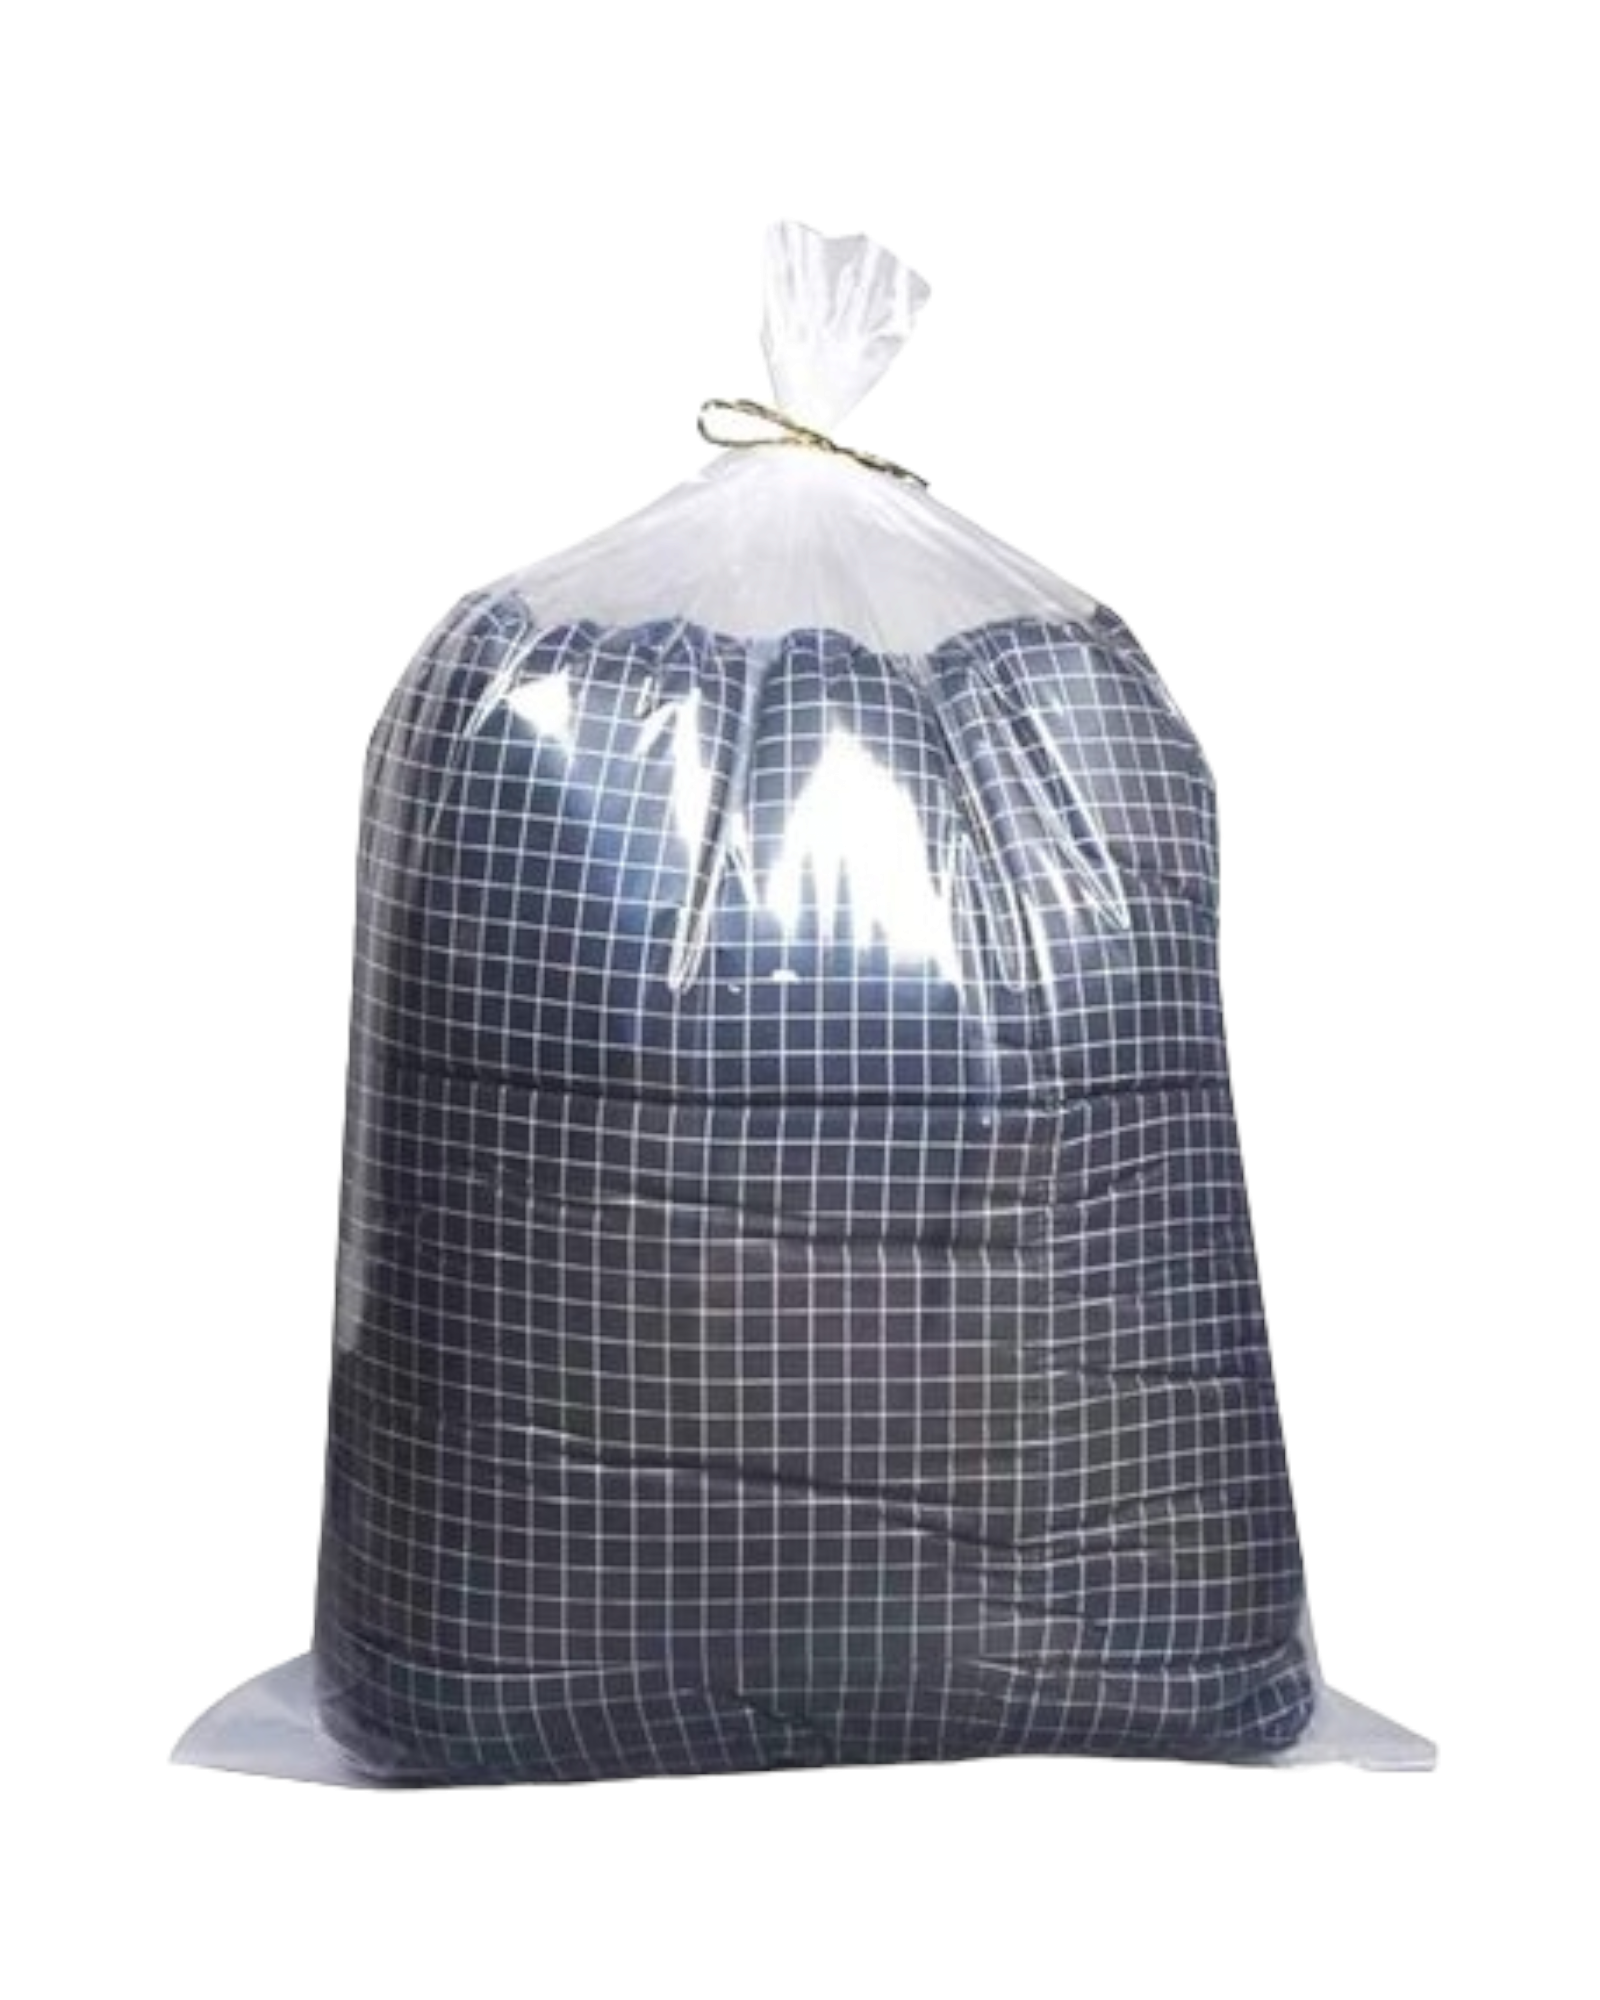 Plastic Packing Bag 450x700mm 50mic Clear 100pack